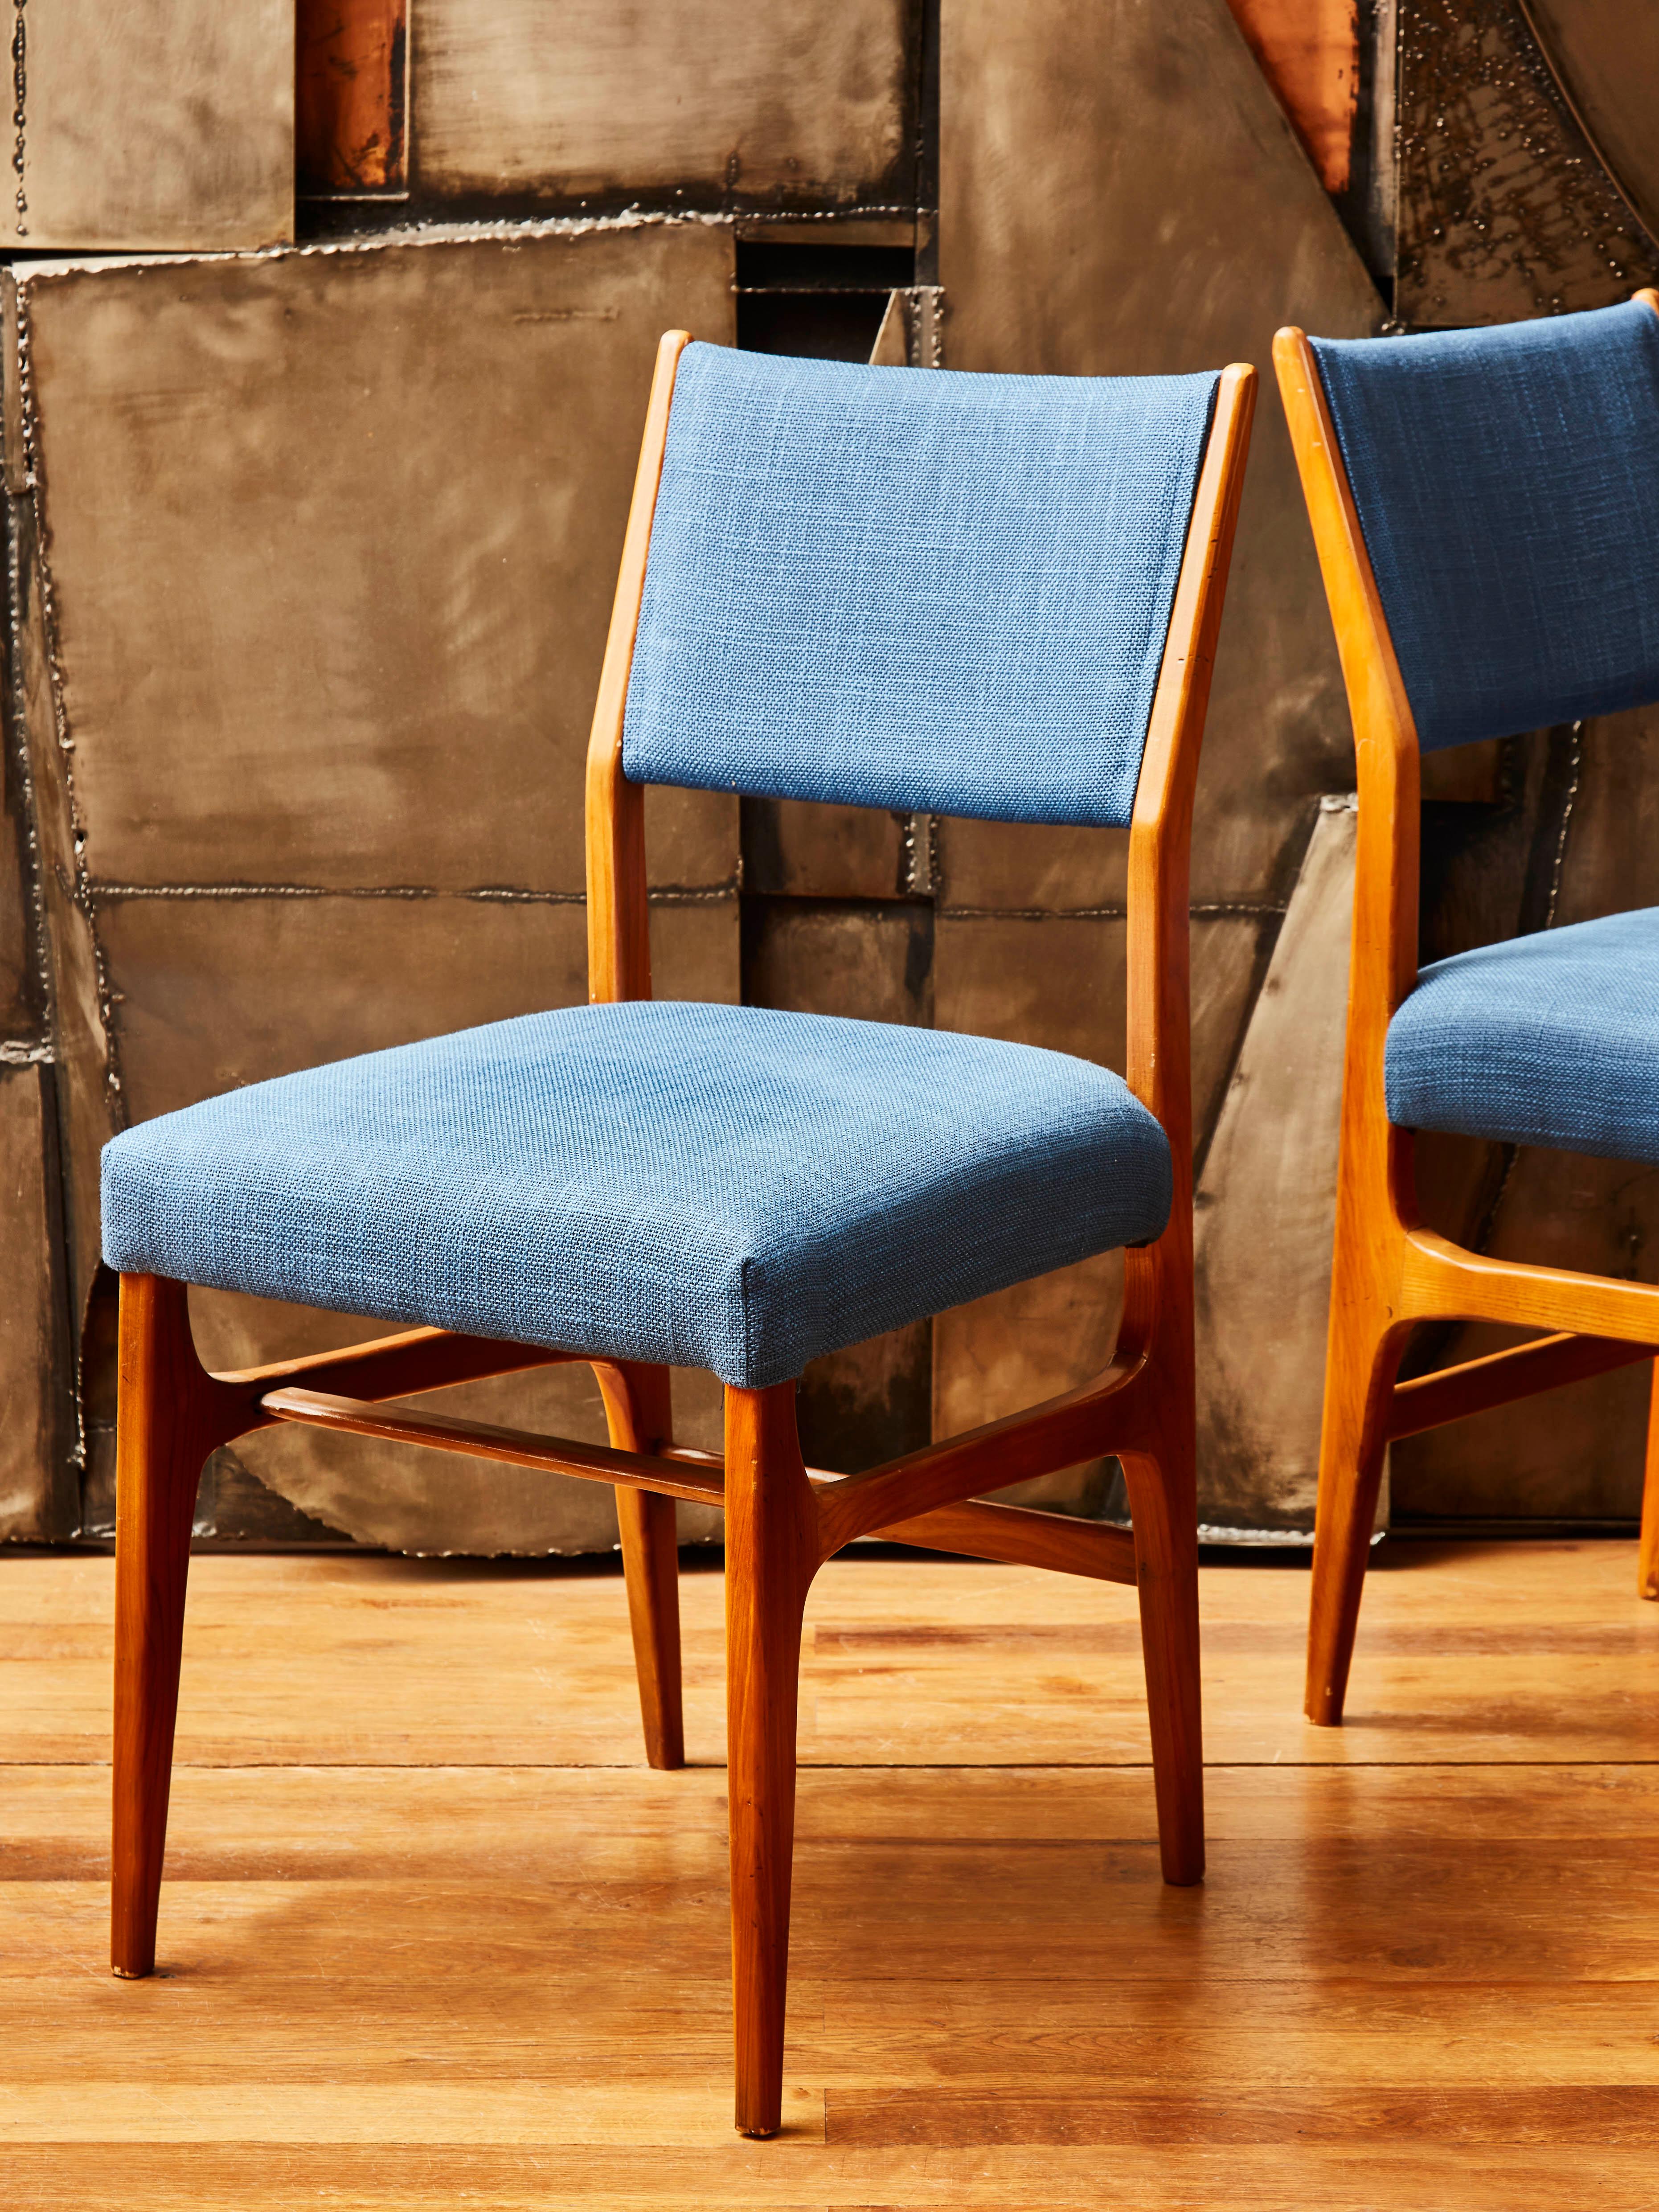 Stunning set of 8 Gio Ponti vintage wooden chairs, upholstered with a blue fabric, made by Cassina, circa 1951, Italy
Entirely restored. 